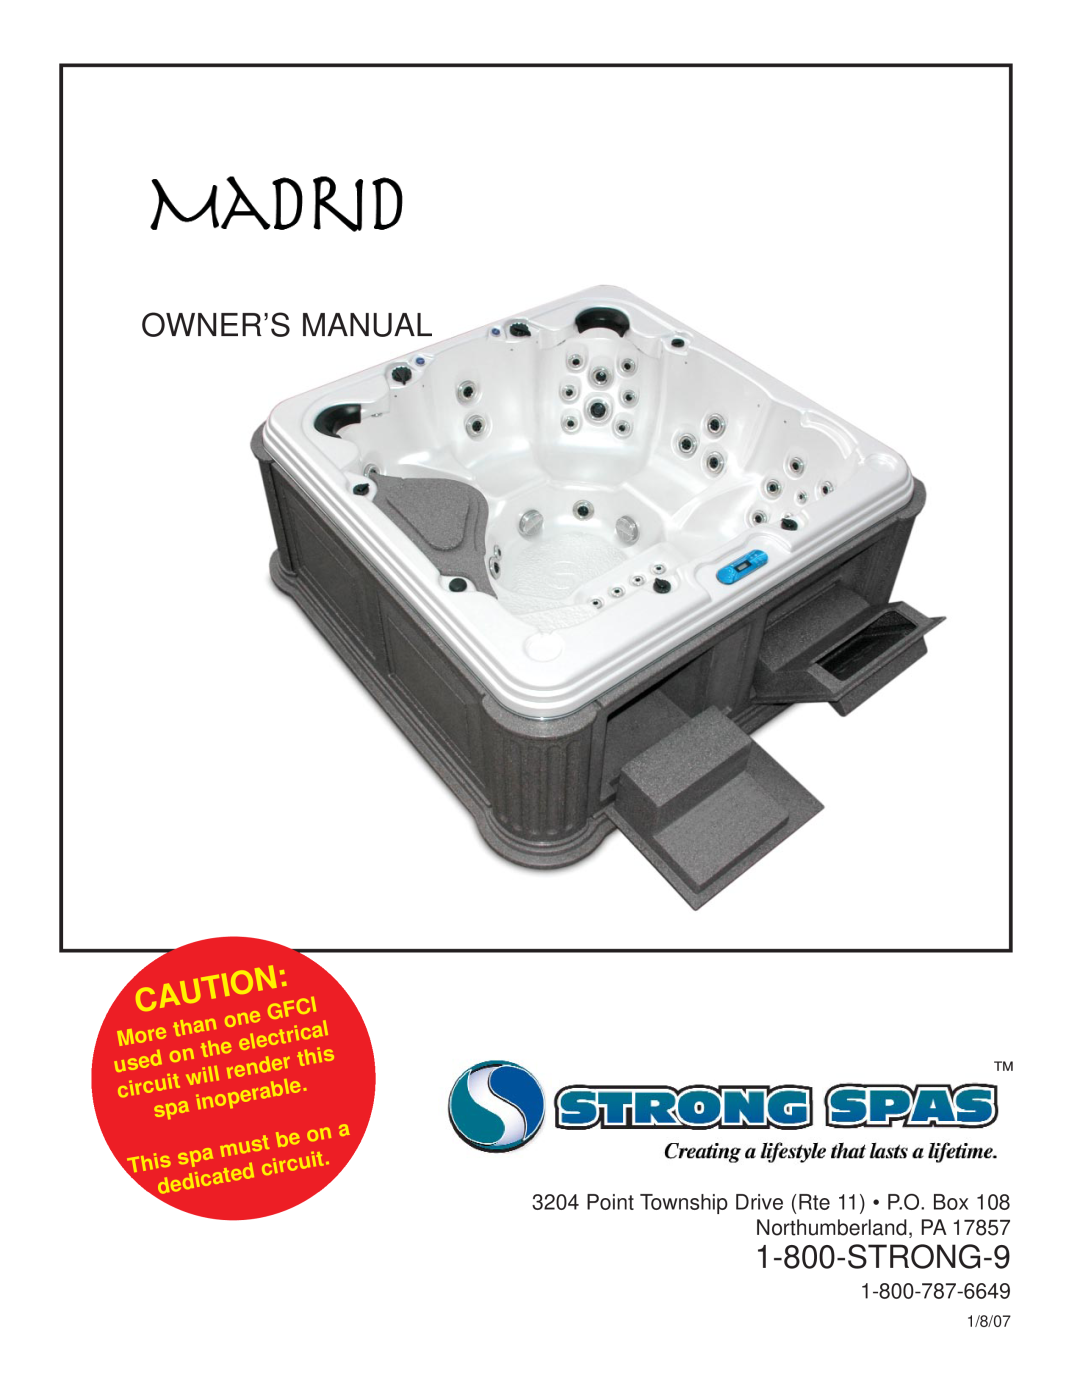 Strong Pools and Spas Madrid owner manual STRONG-9, than, Gfci, More, electrical, used, this, render, will, circuit, must 